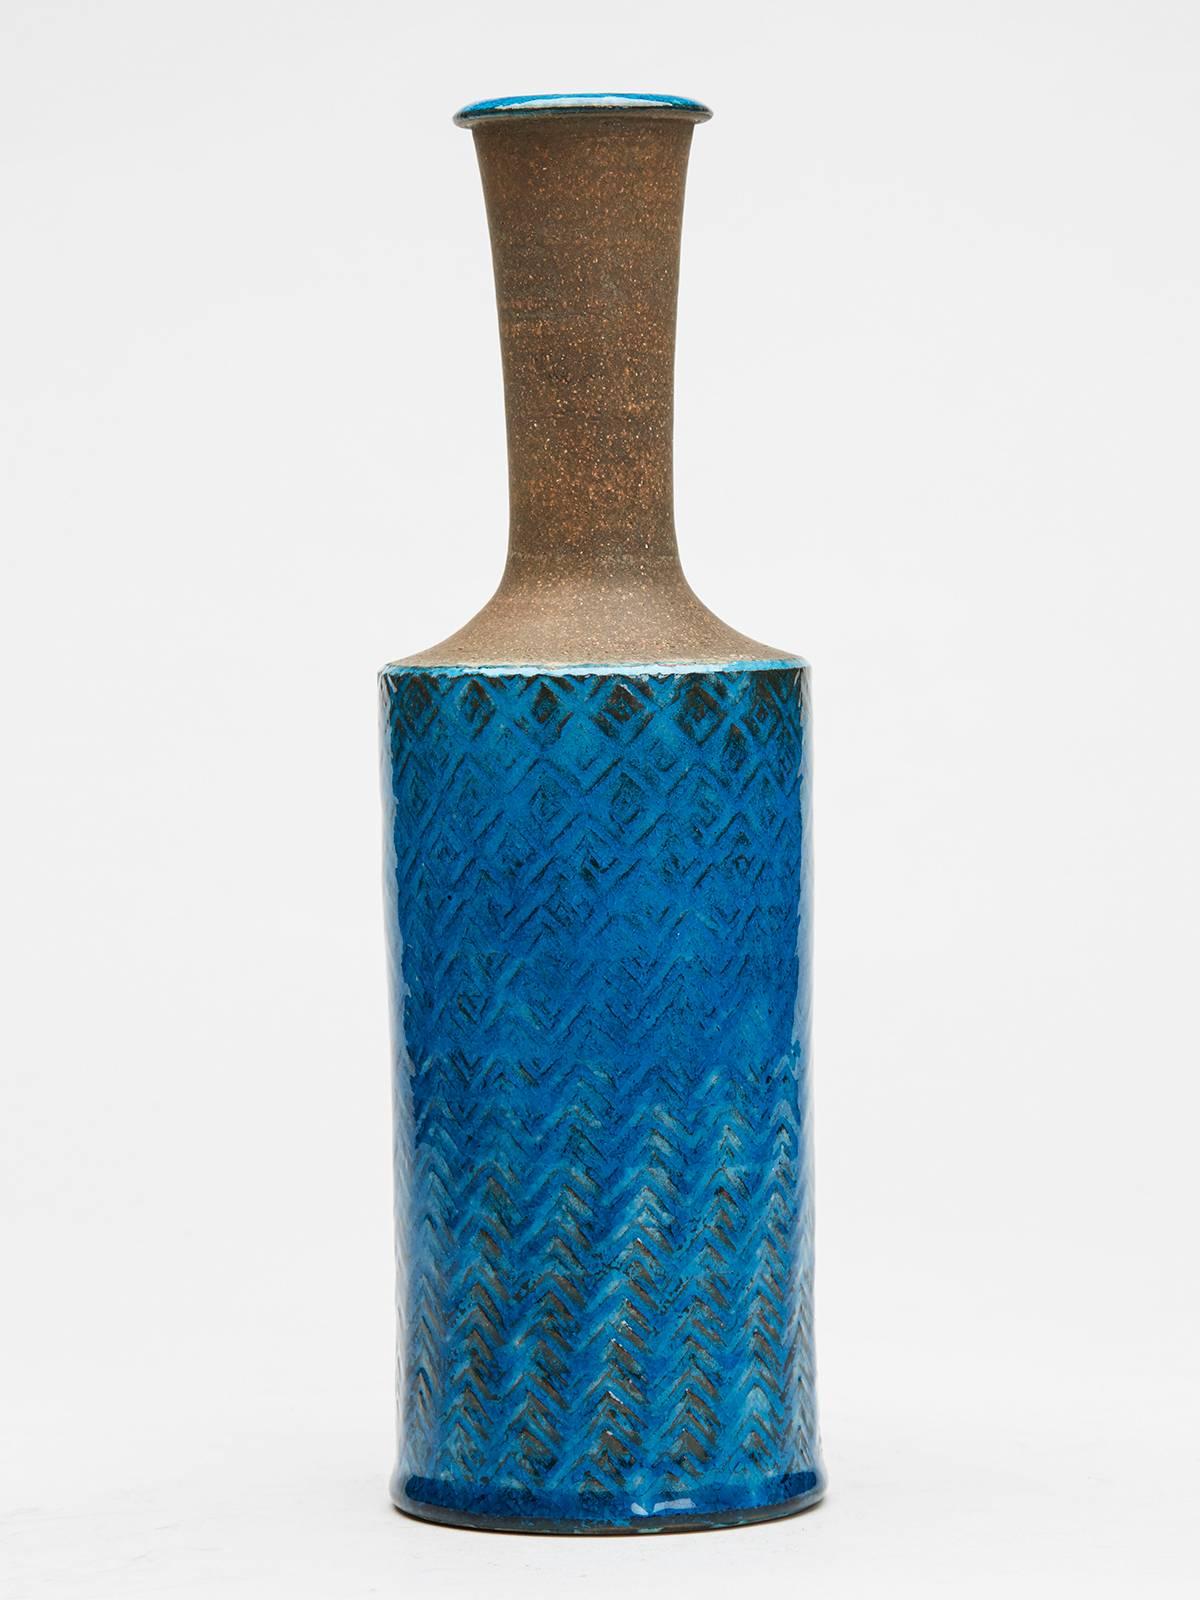 A very stylish Danish studio pottery bottle shaped vase by Nils Joakim Kahler (1906-1979) with a cylindrical shaped body with a moulded pattern decorated in turquoise blue glazes with a narrow unglazed neck and with glazed top rim and inside of